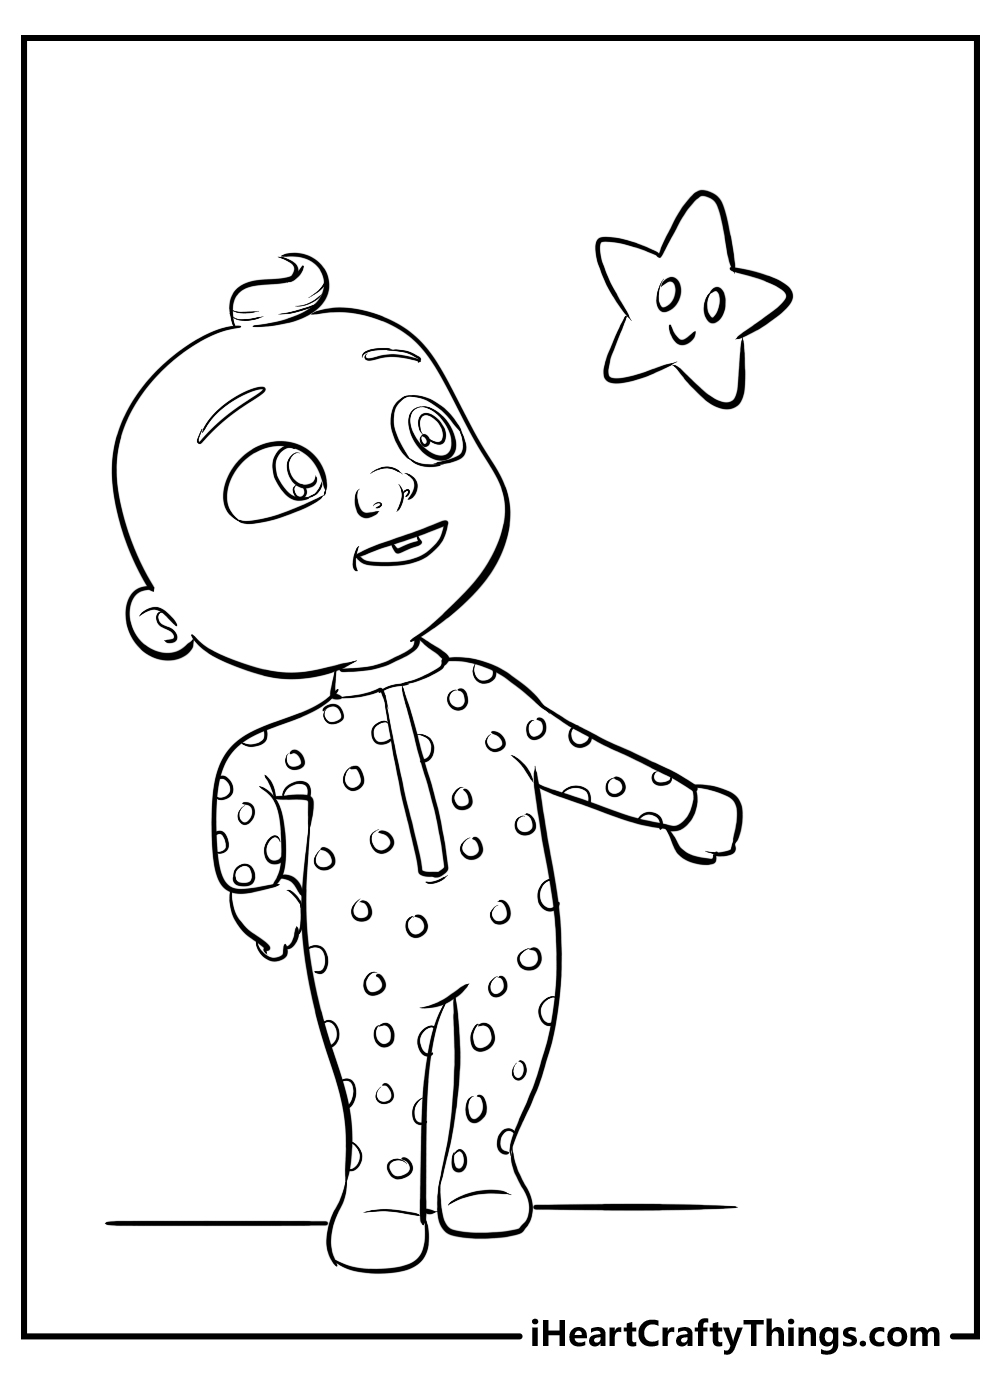 Cocomelon Coloring Pages - Coloring Pages For Kids And Adults